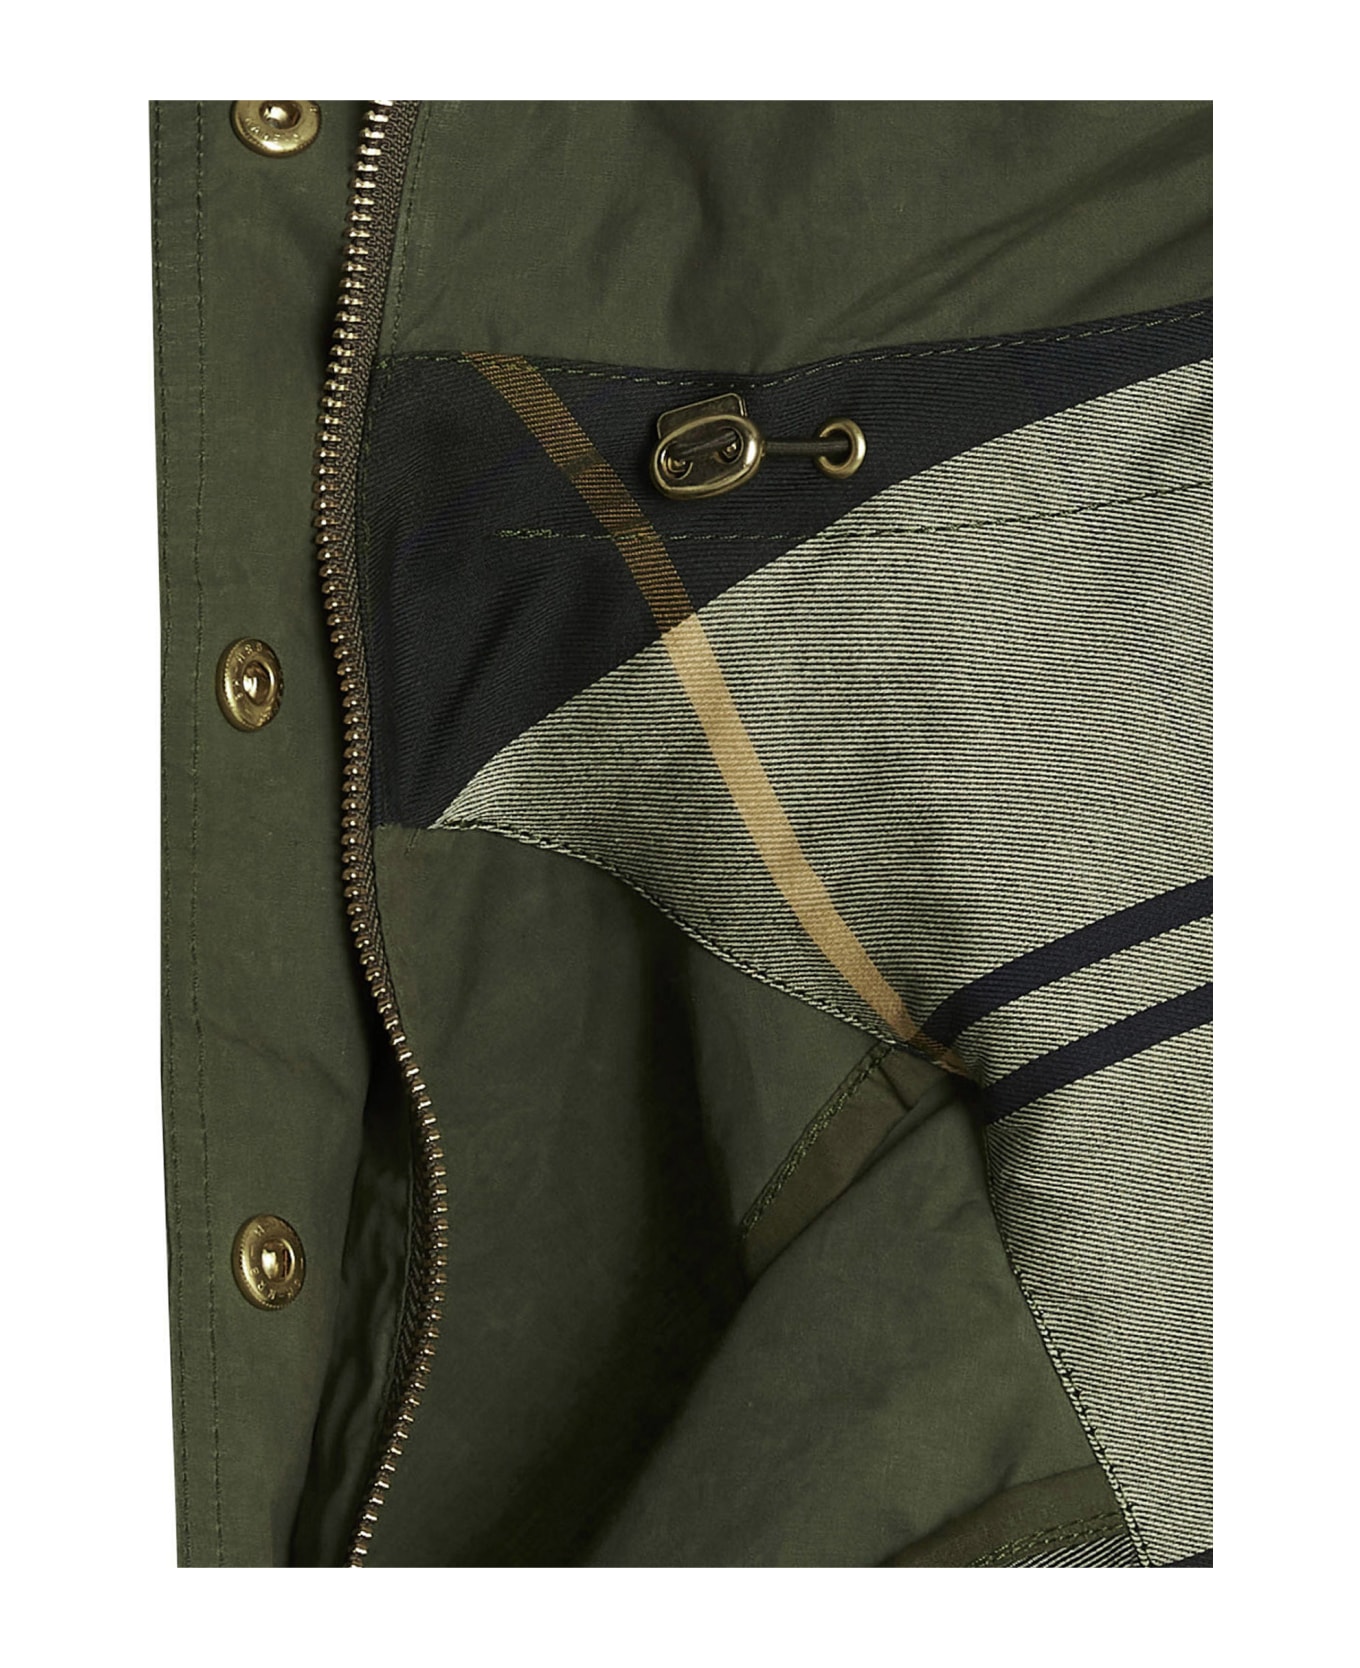 Barbour 'nith' Jacket Barbour - MILITARY GREEN